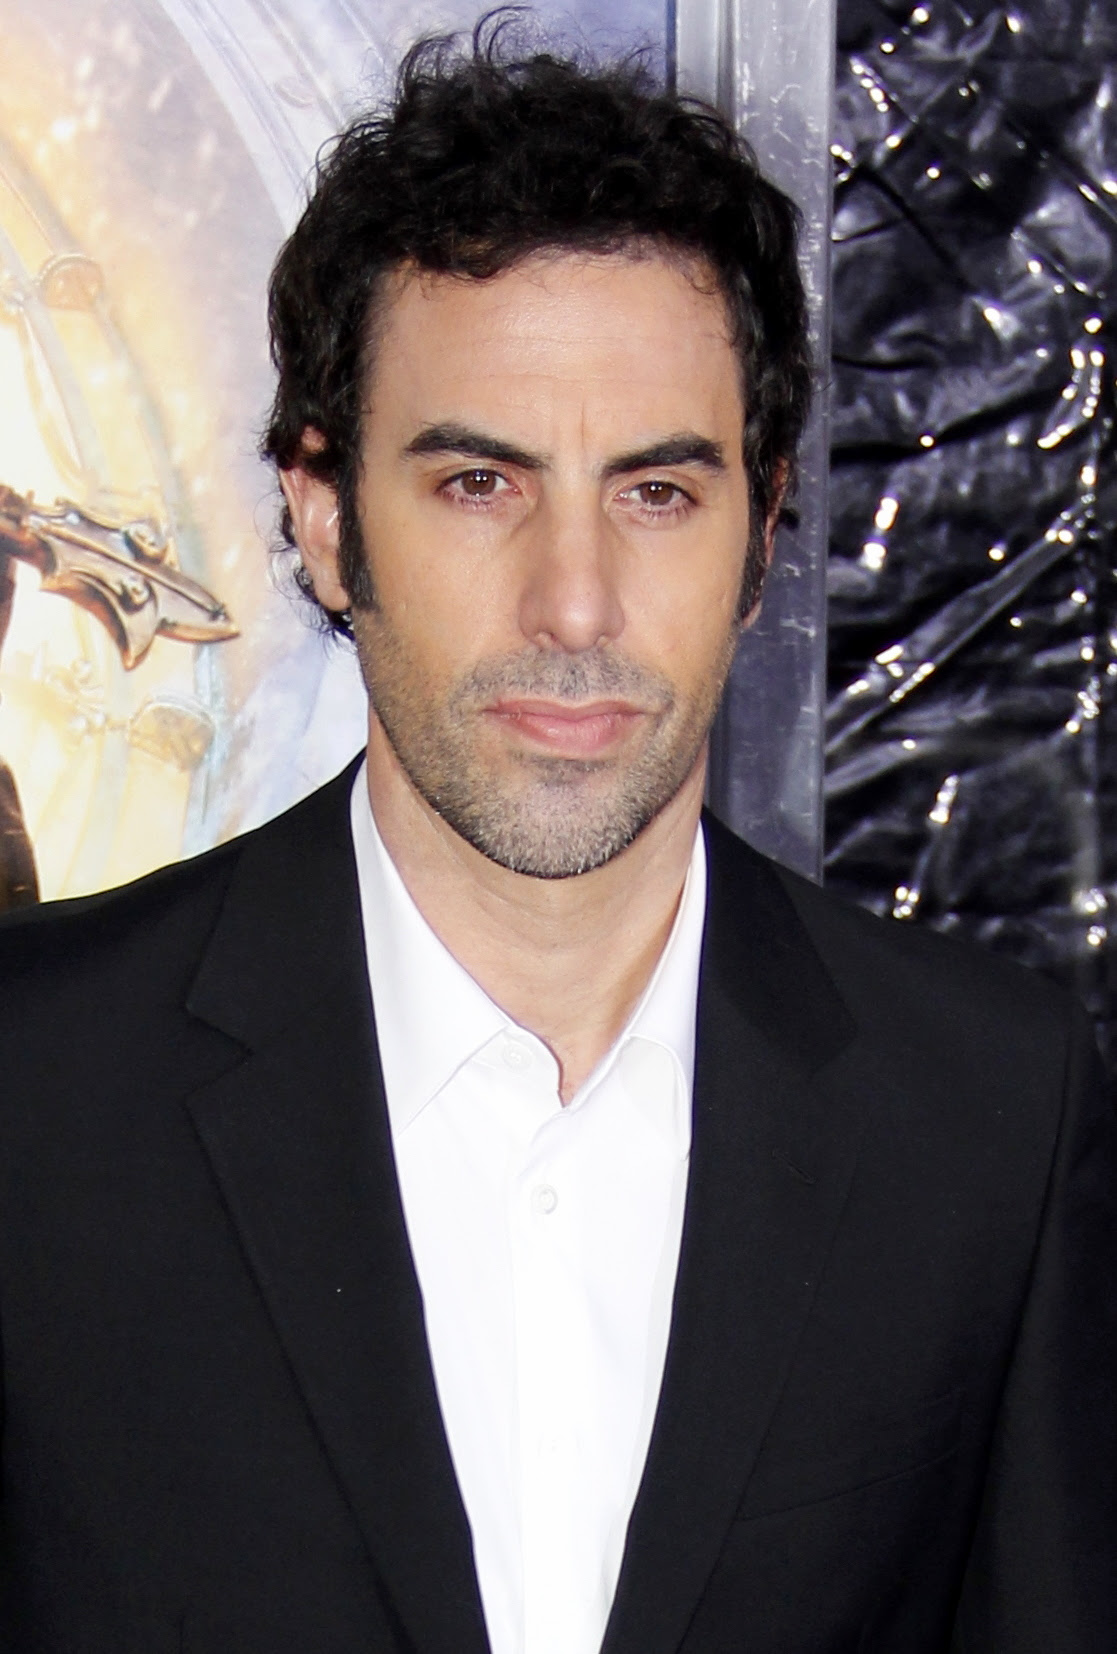 Sacha Baron Cohen takes on a more serious role in “The Spy”